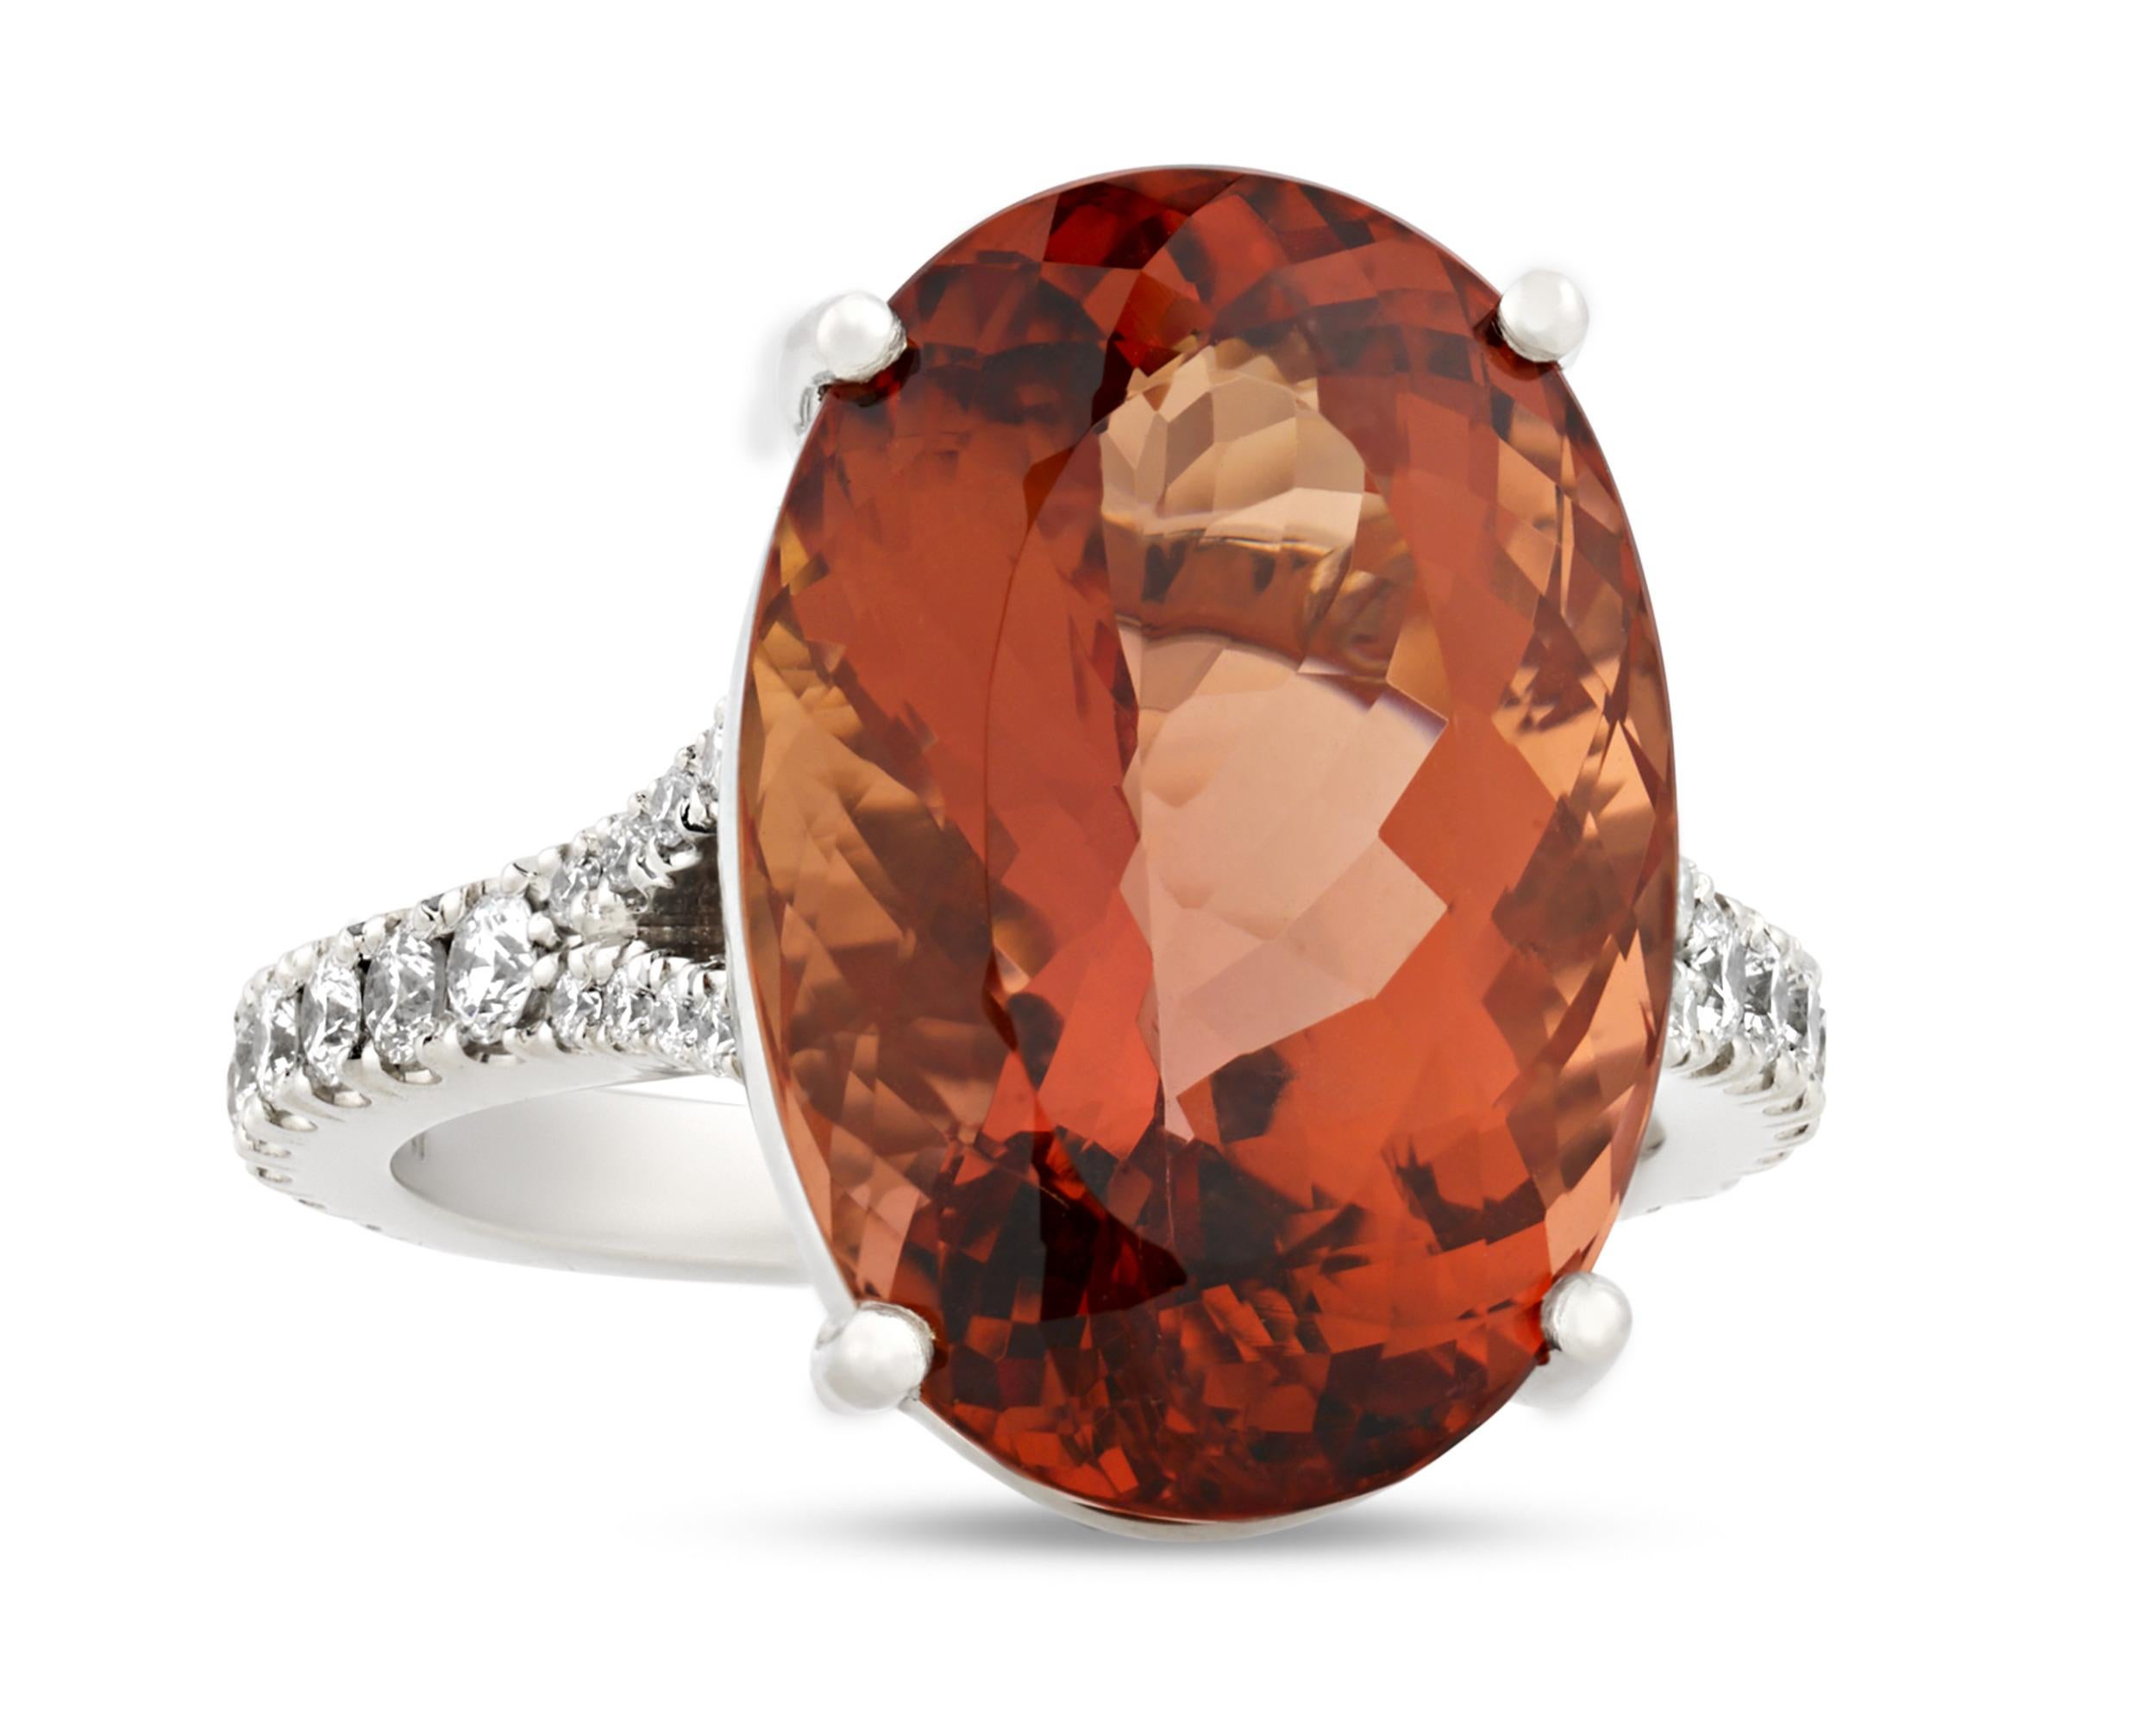 An imperial topaz weighing a monumental 15.61 carats and displaying a highly prized reddish-orange hue is the star of this remarkable ring. Imperial topaz is the rarest of all topaz varieties, and this stone is certified by the American Gemological